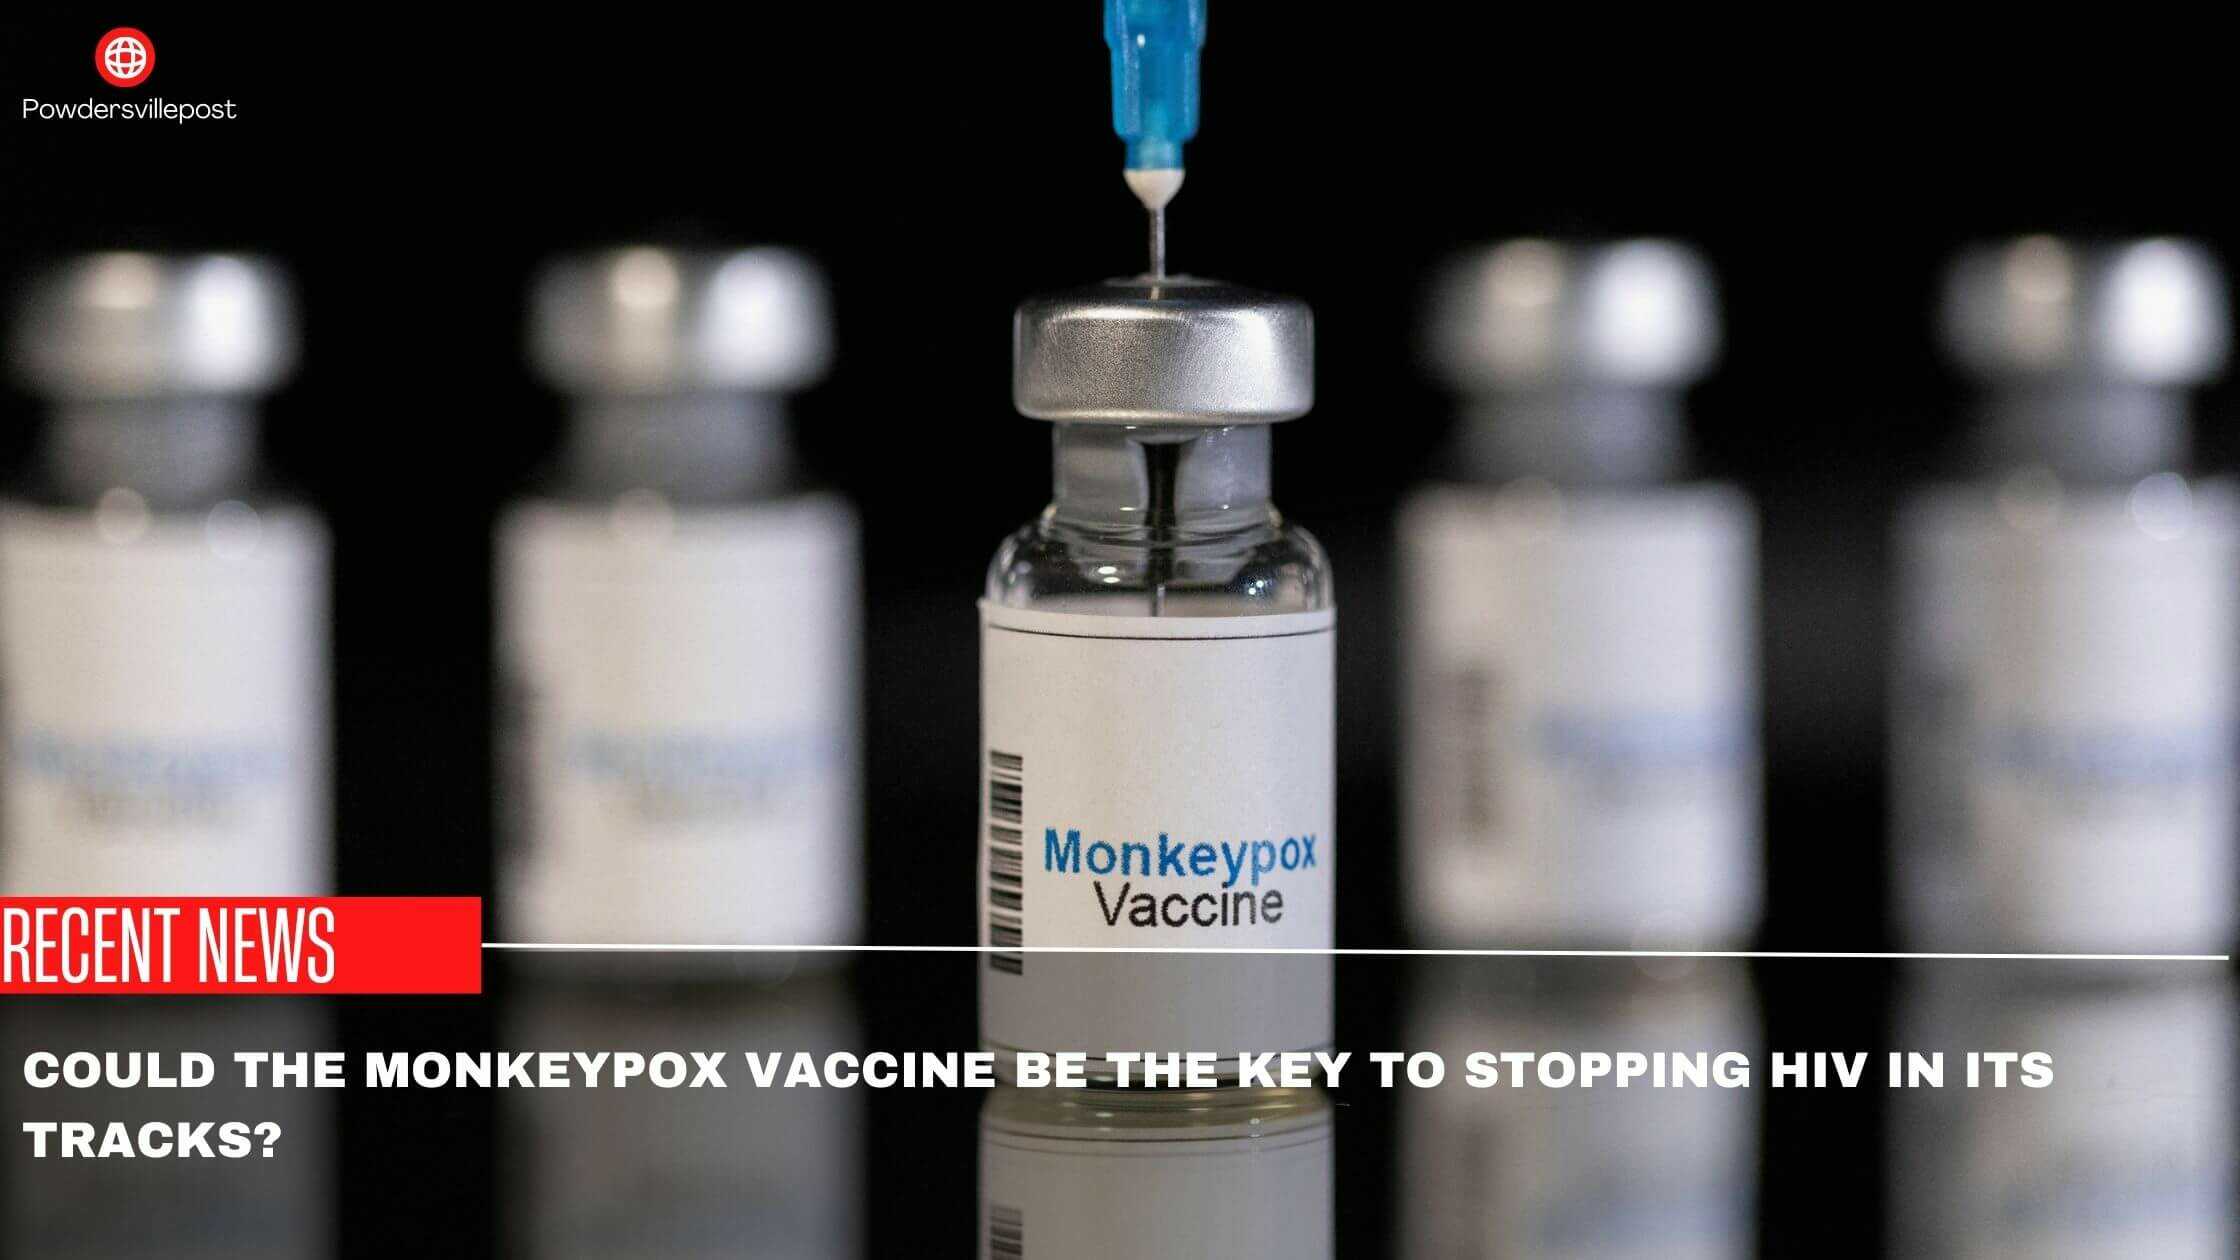 Could The Monkeypox Vaccine Be The Key To Stopping HIV In Its Tracks